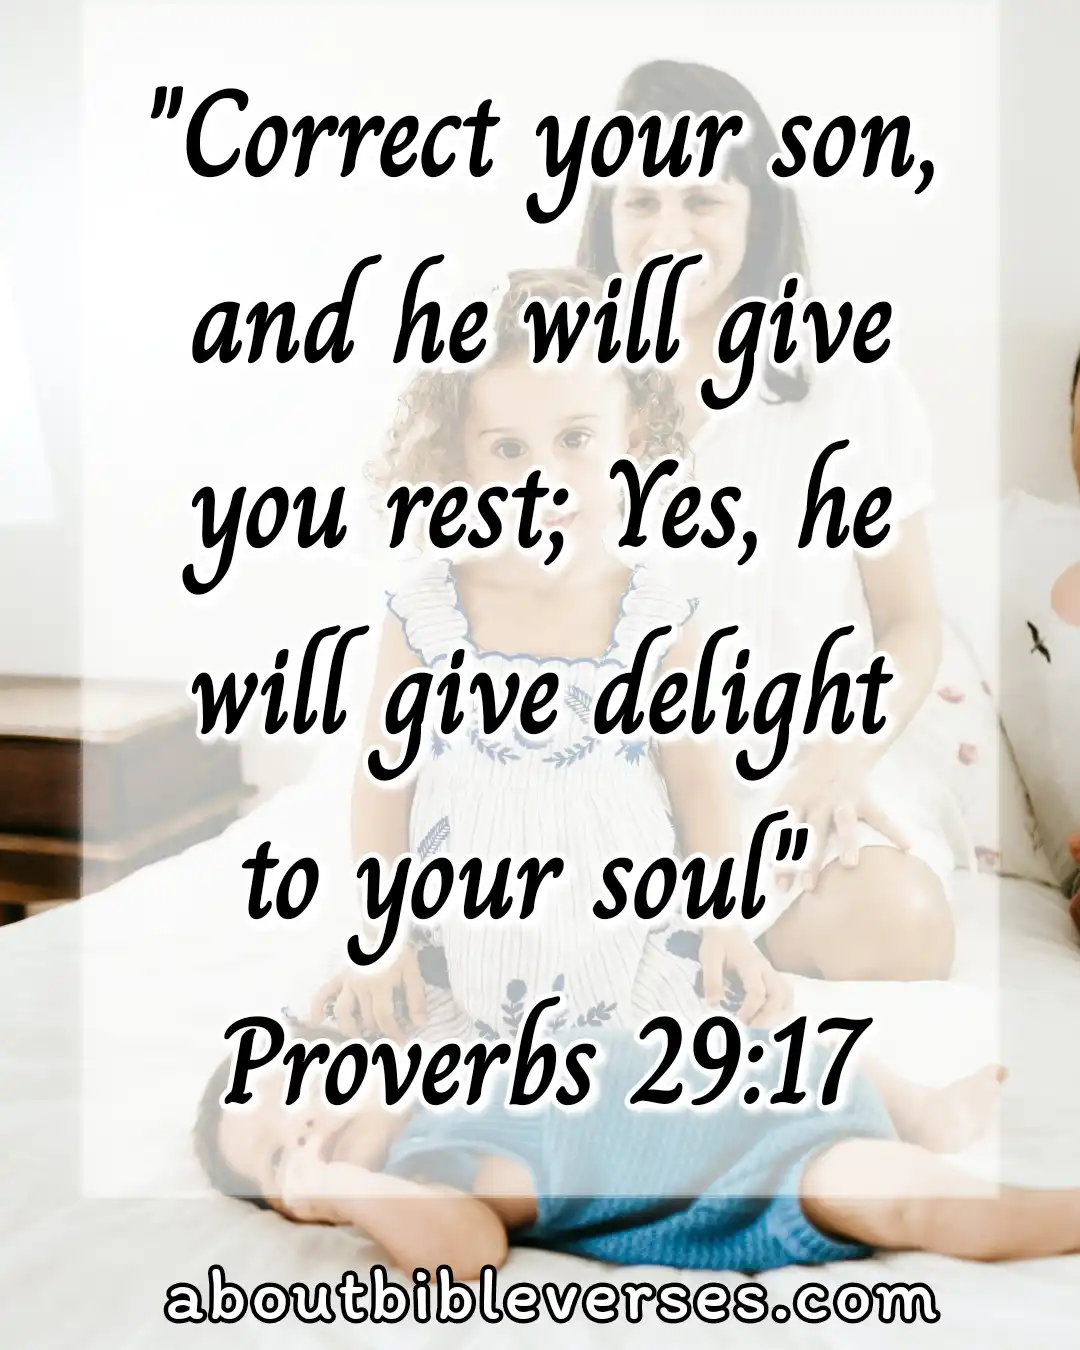 Bible Verses About Concern For The Family And Future Generations (Proverbs 29:17)